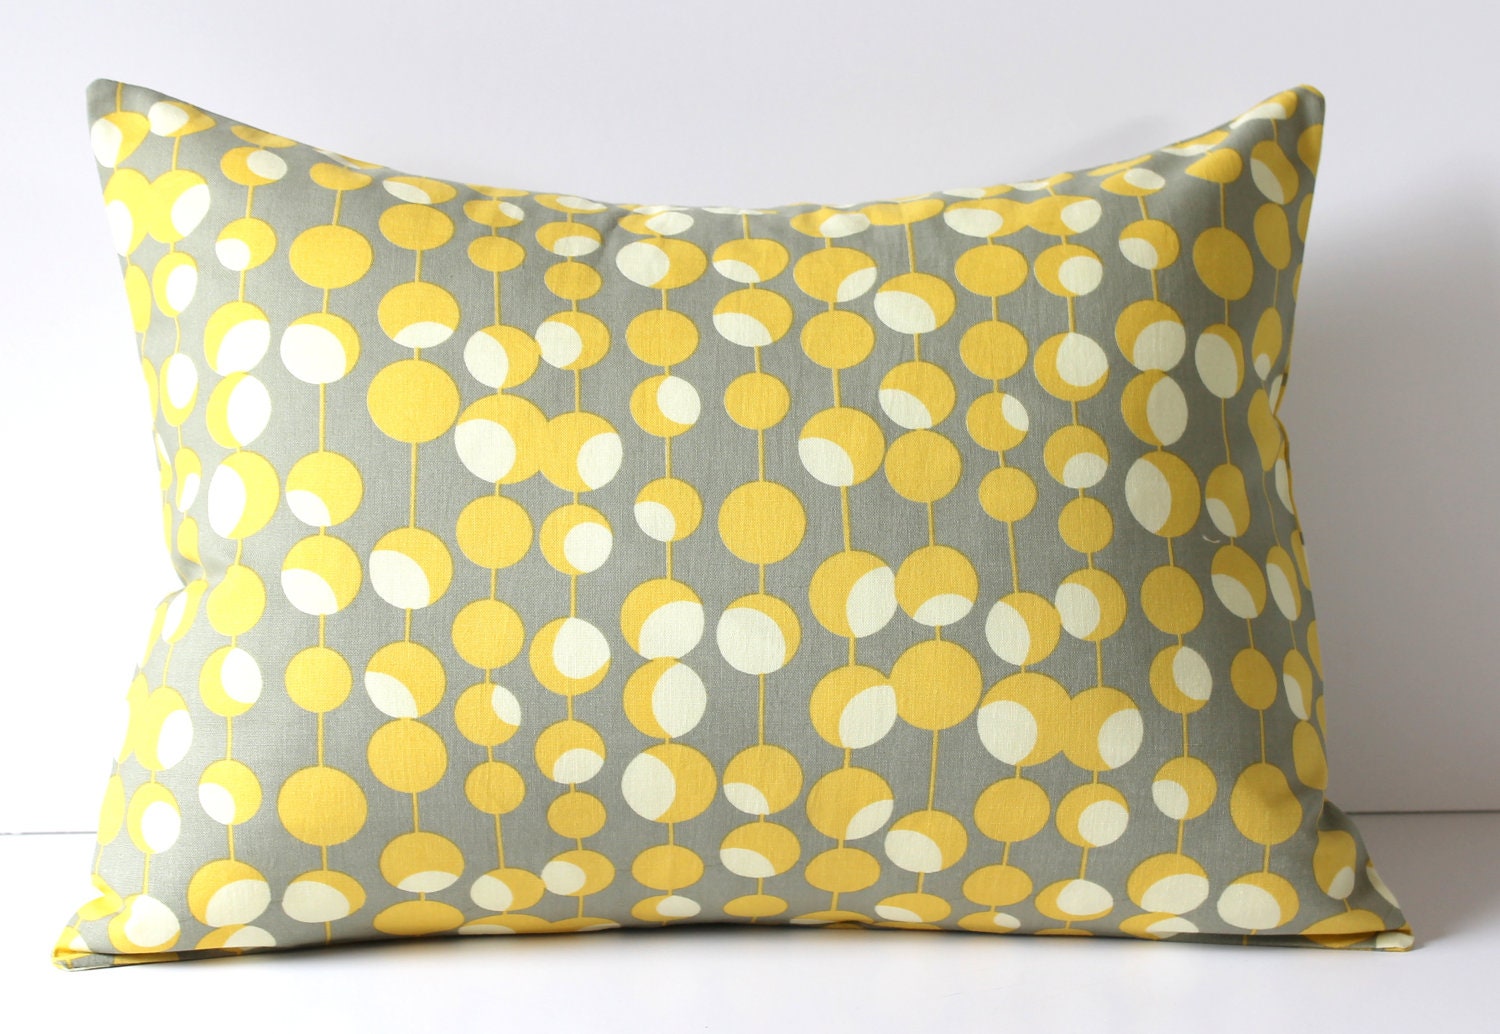 Decorative Pillow Cover Gray & Mustard Yellow by SewGracious